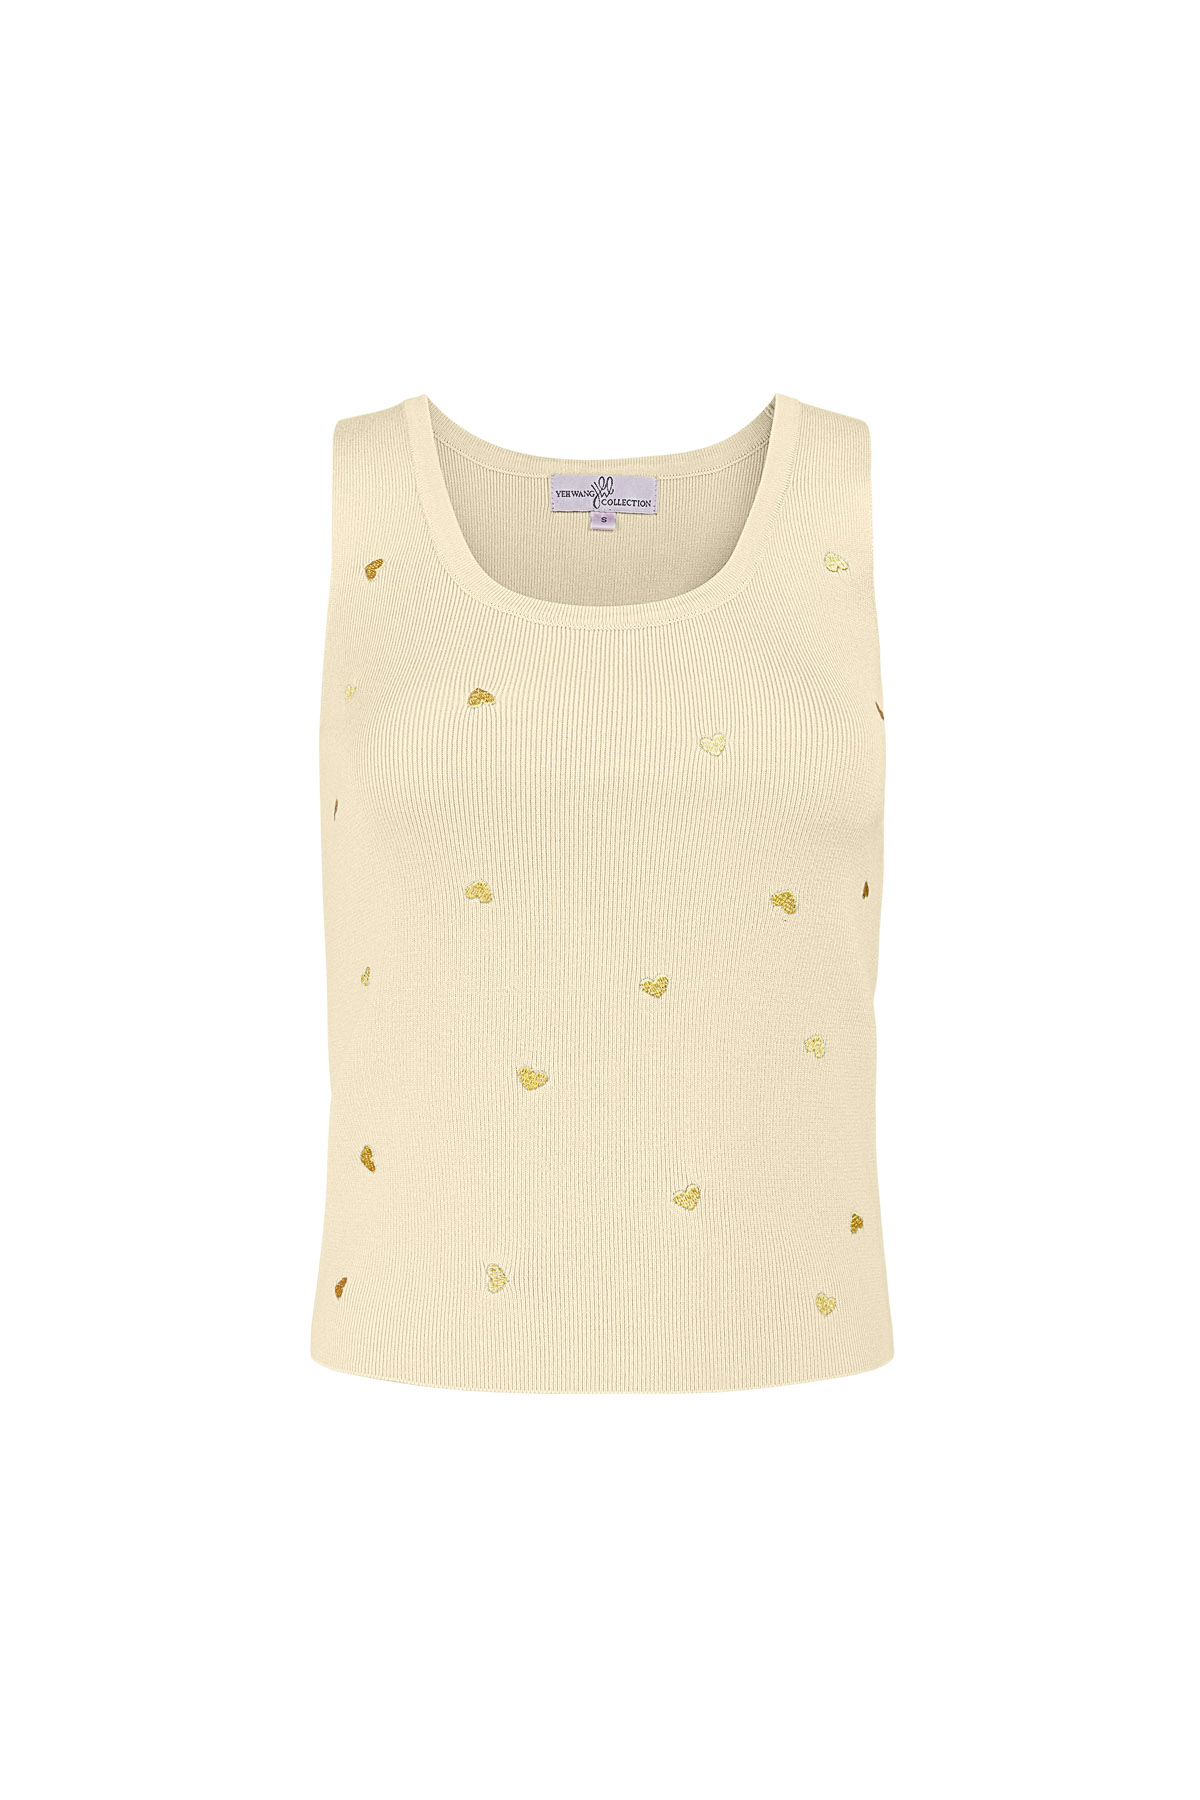 Sleeveless top with gold heart details large – beige 